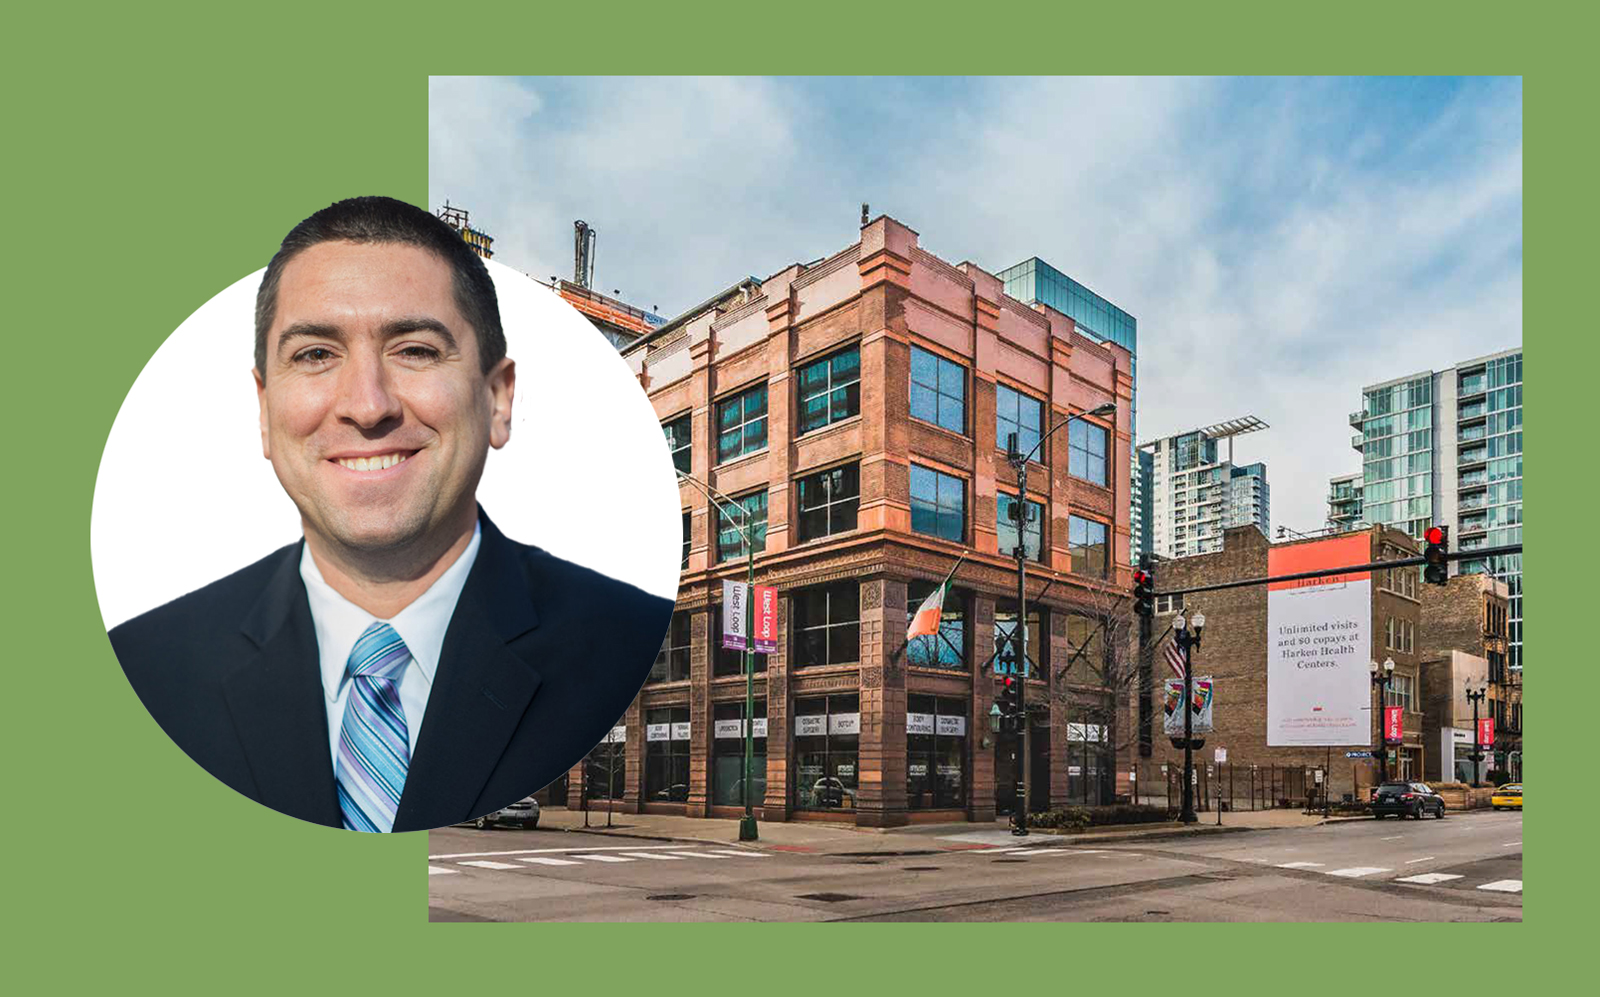 Vista Property principal Hymie Mishan, whose company is betting on the West Loop office market. (Images via Vista Property)